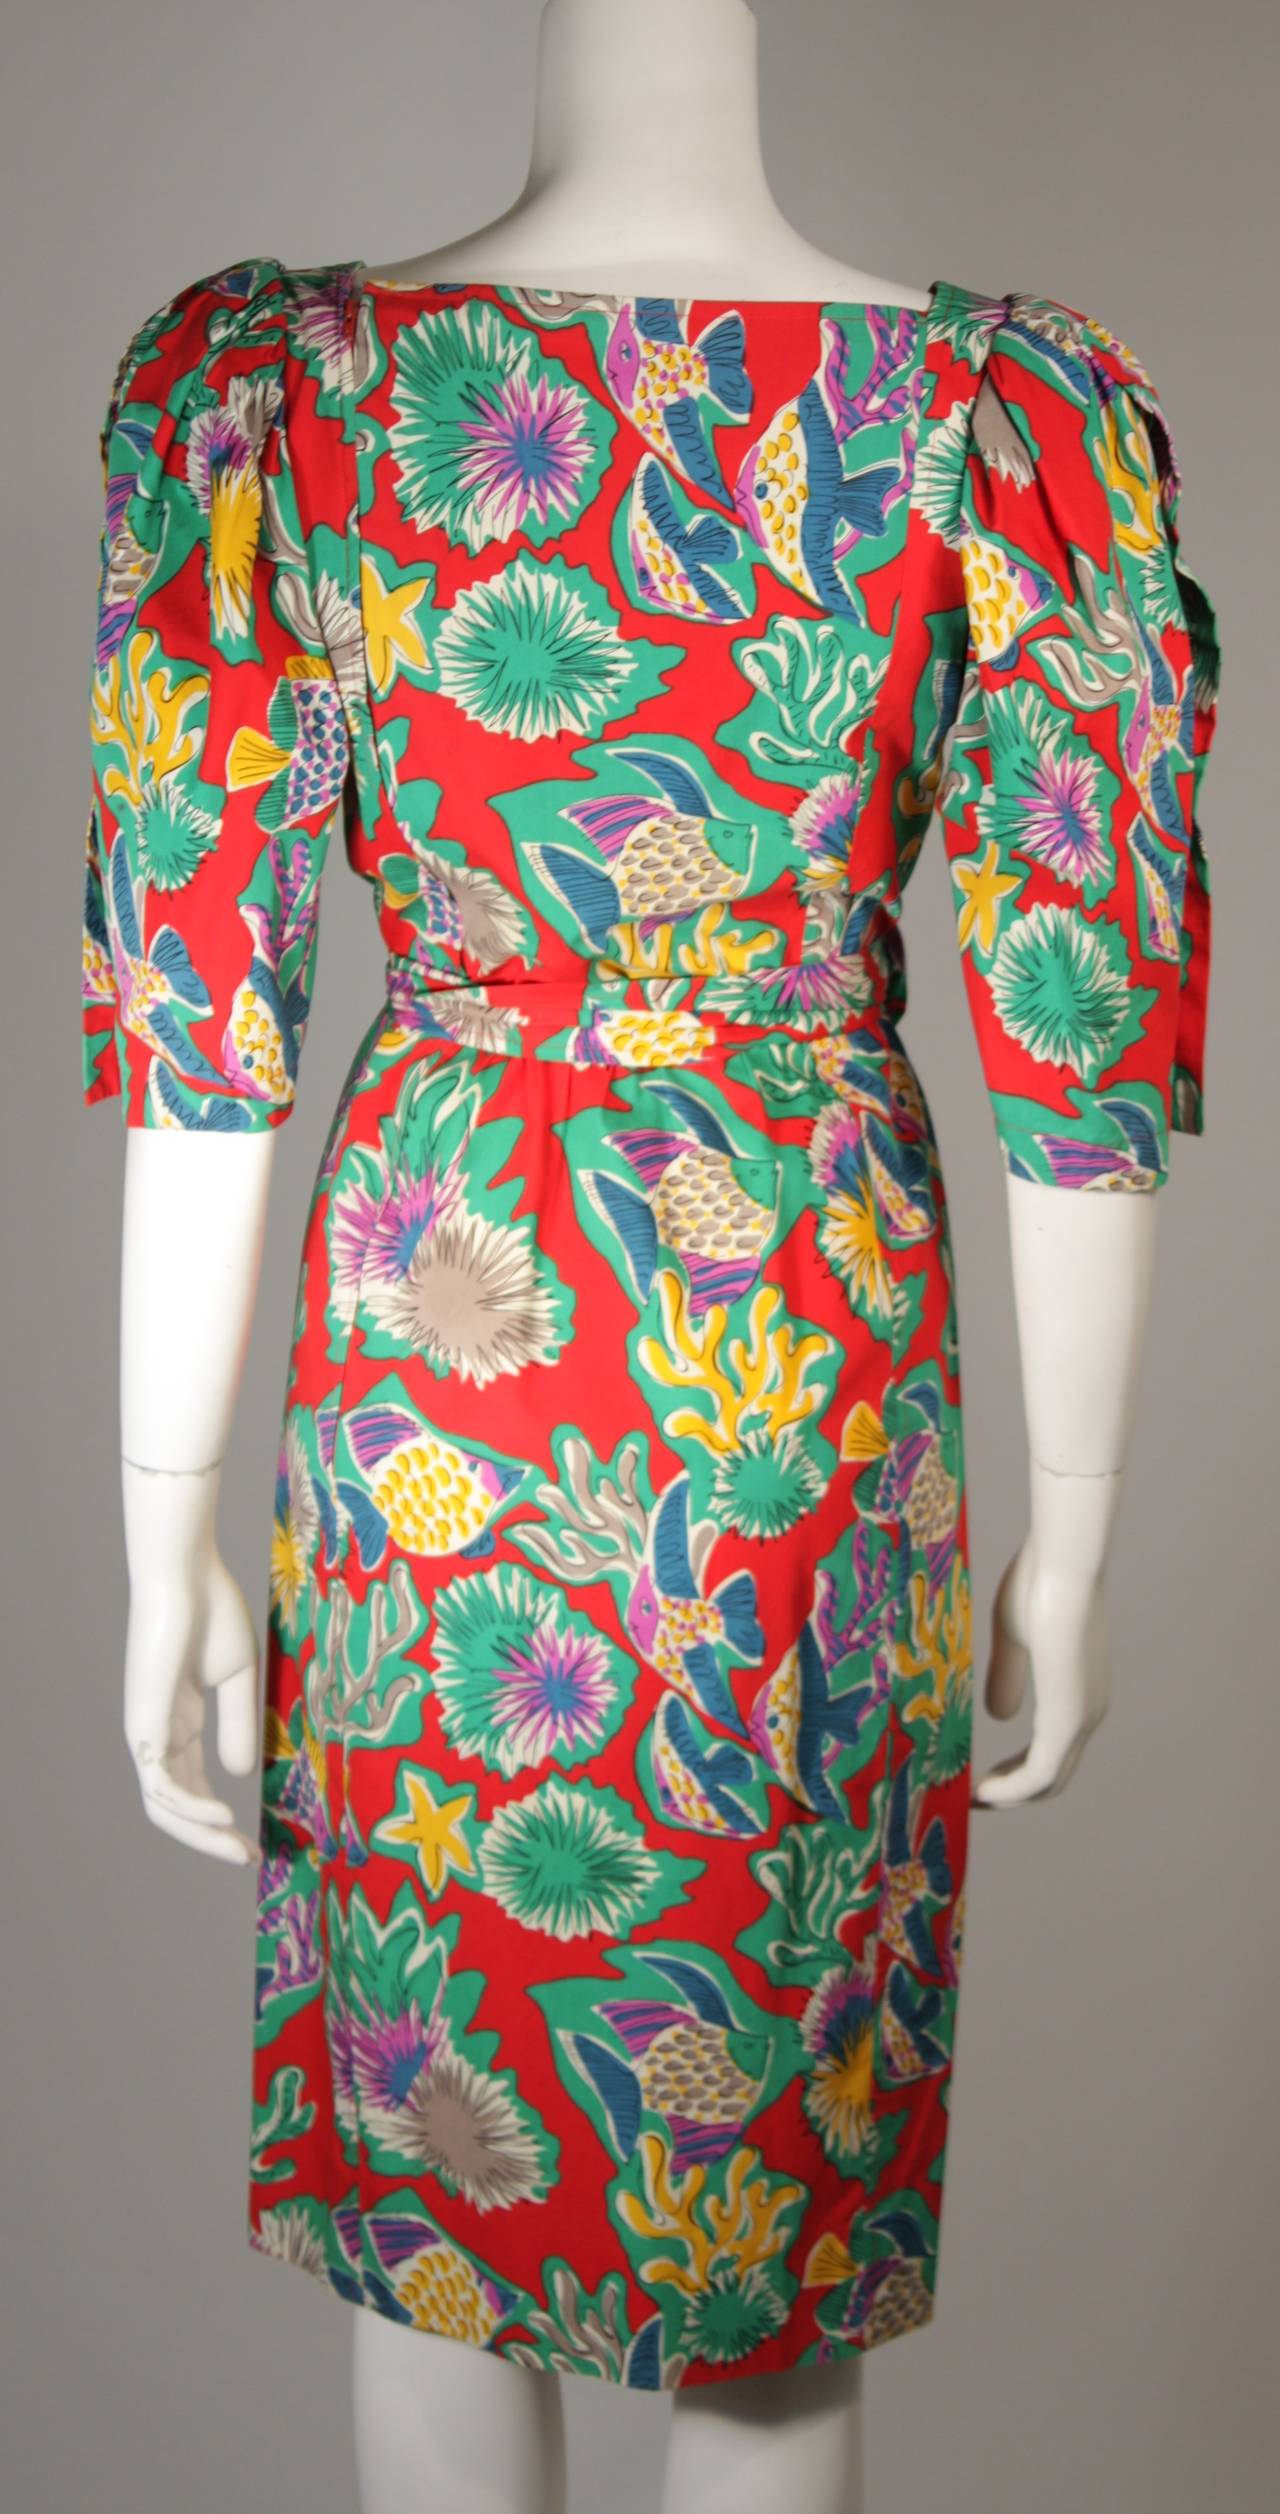 Yves Saint Laurent Red Cotton Belted Dress with Reef Life Pattern Size 38 In Excellent Condition For Sale In Los Angeles, CA